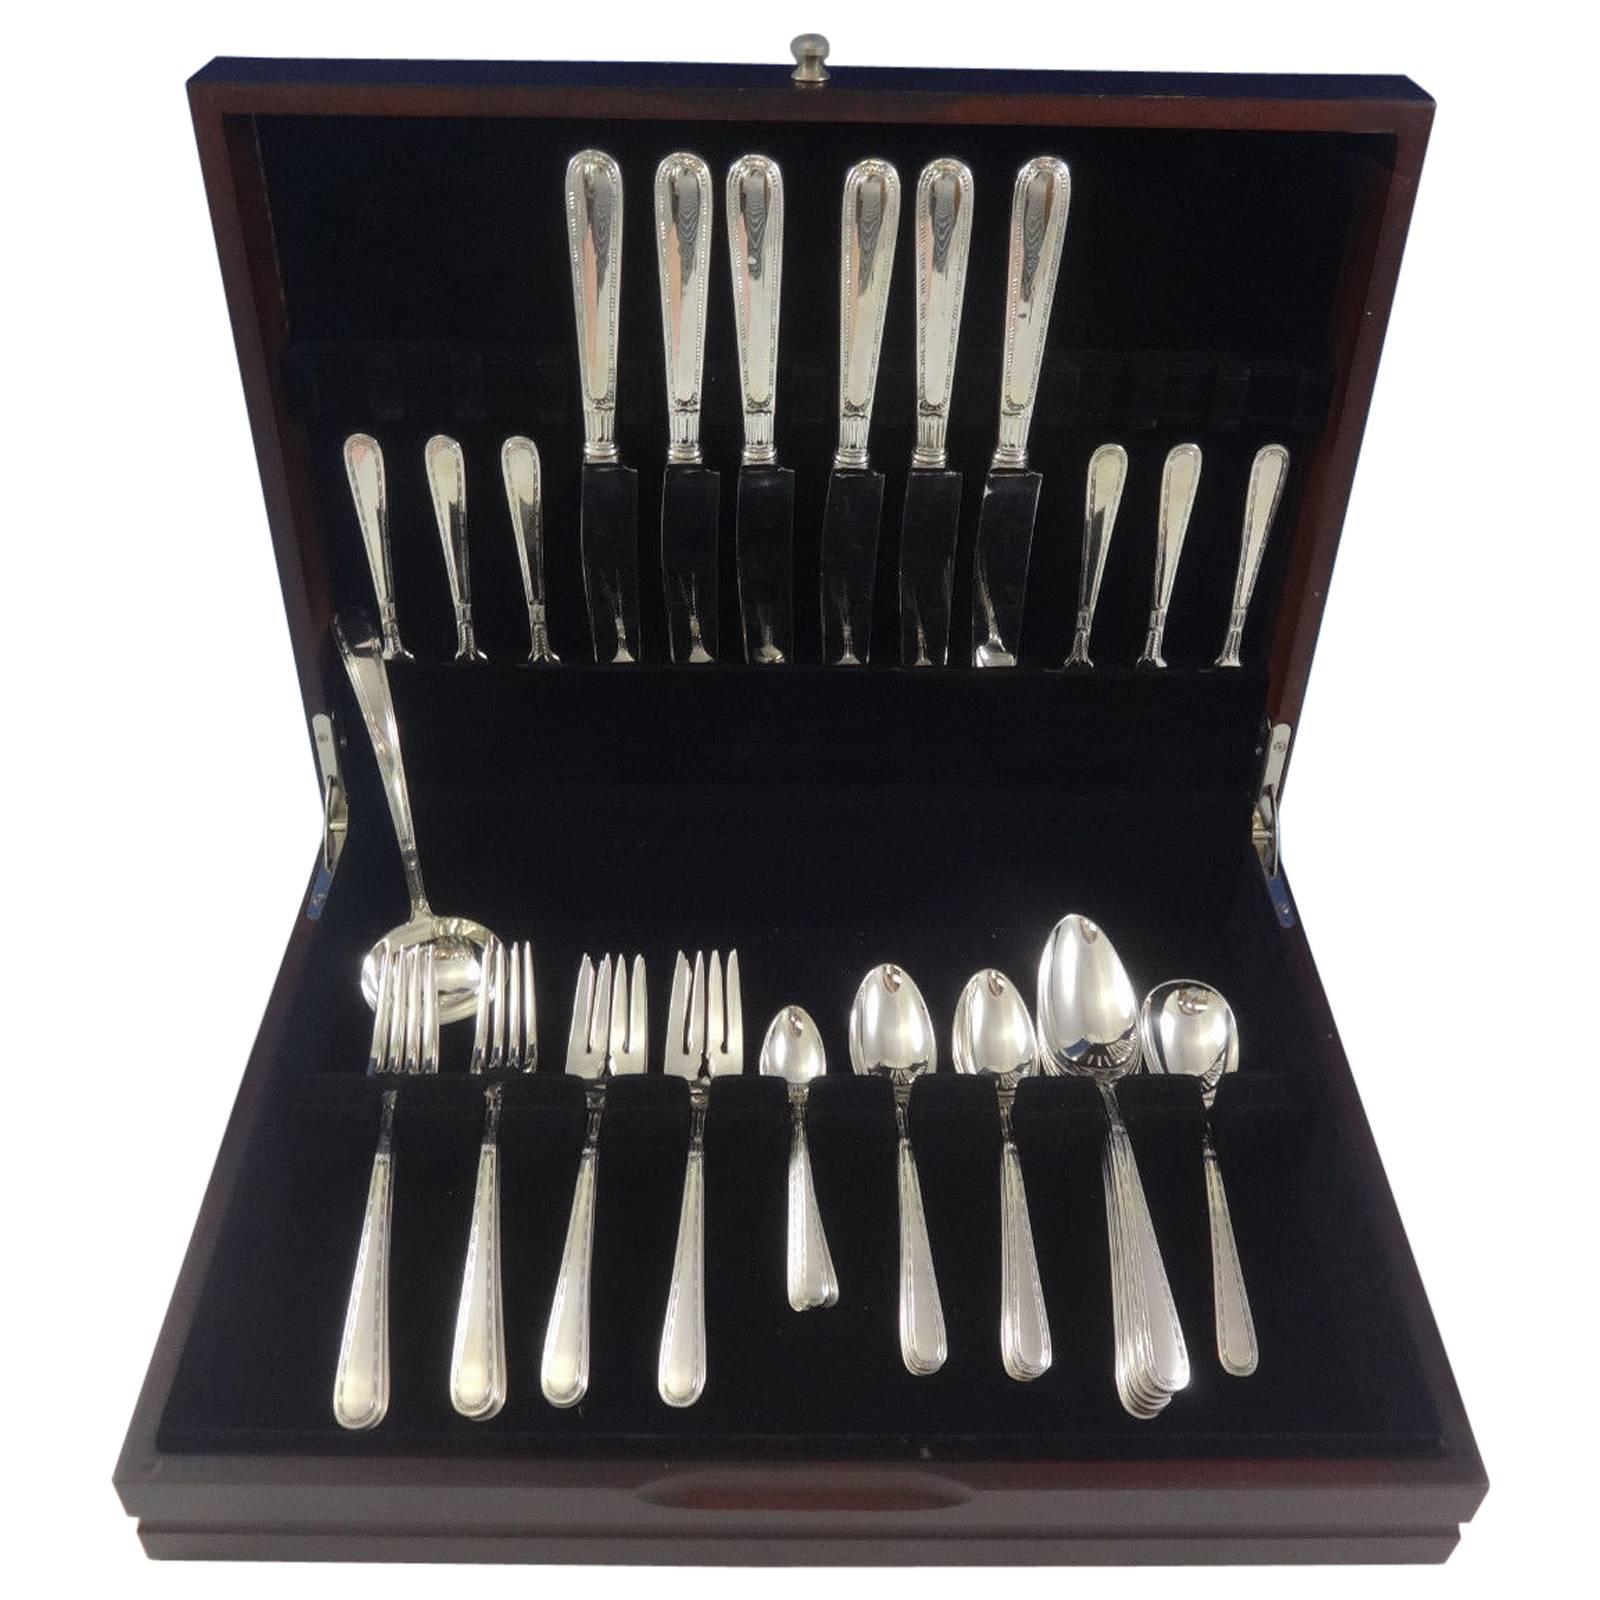 Rare Miss America by Alvin Sterling silver flatware set - 43 pieces. This set includes: Six knives, 9 5/8", Six forks, 7", Six salad forks, 6 1/4", Six teaspoons, 6", Six place soup spoons, 7", Six flat handle butter